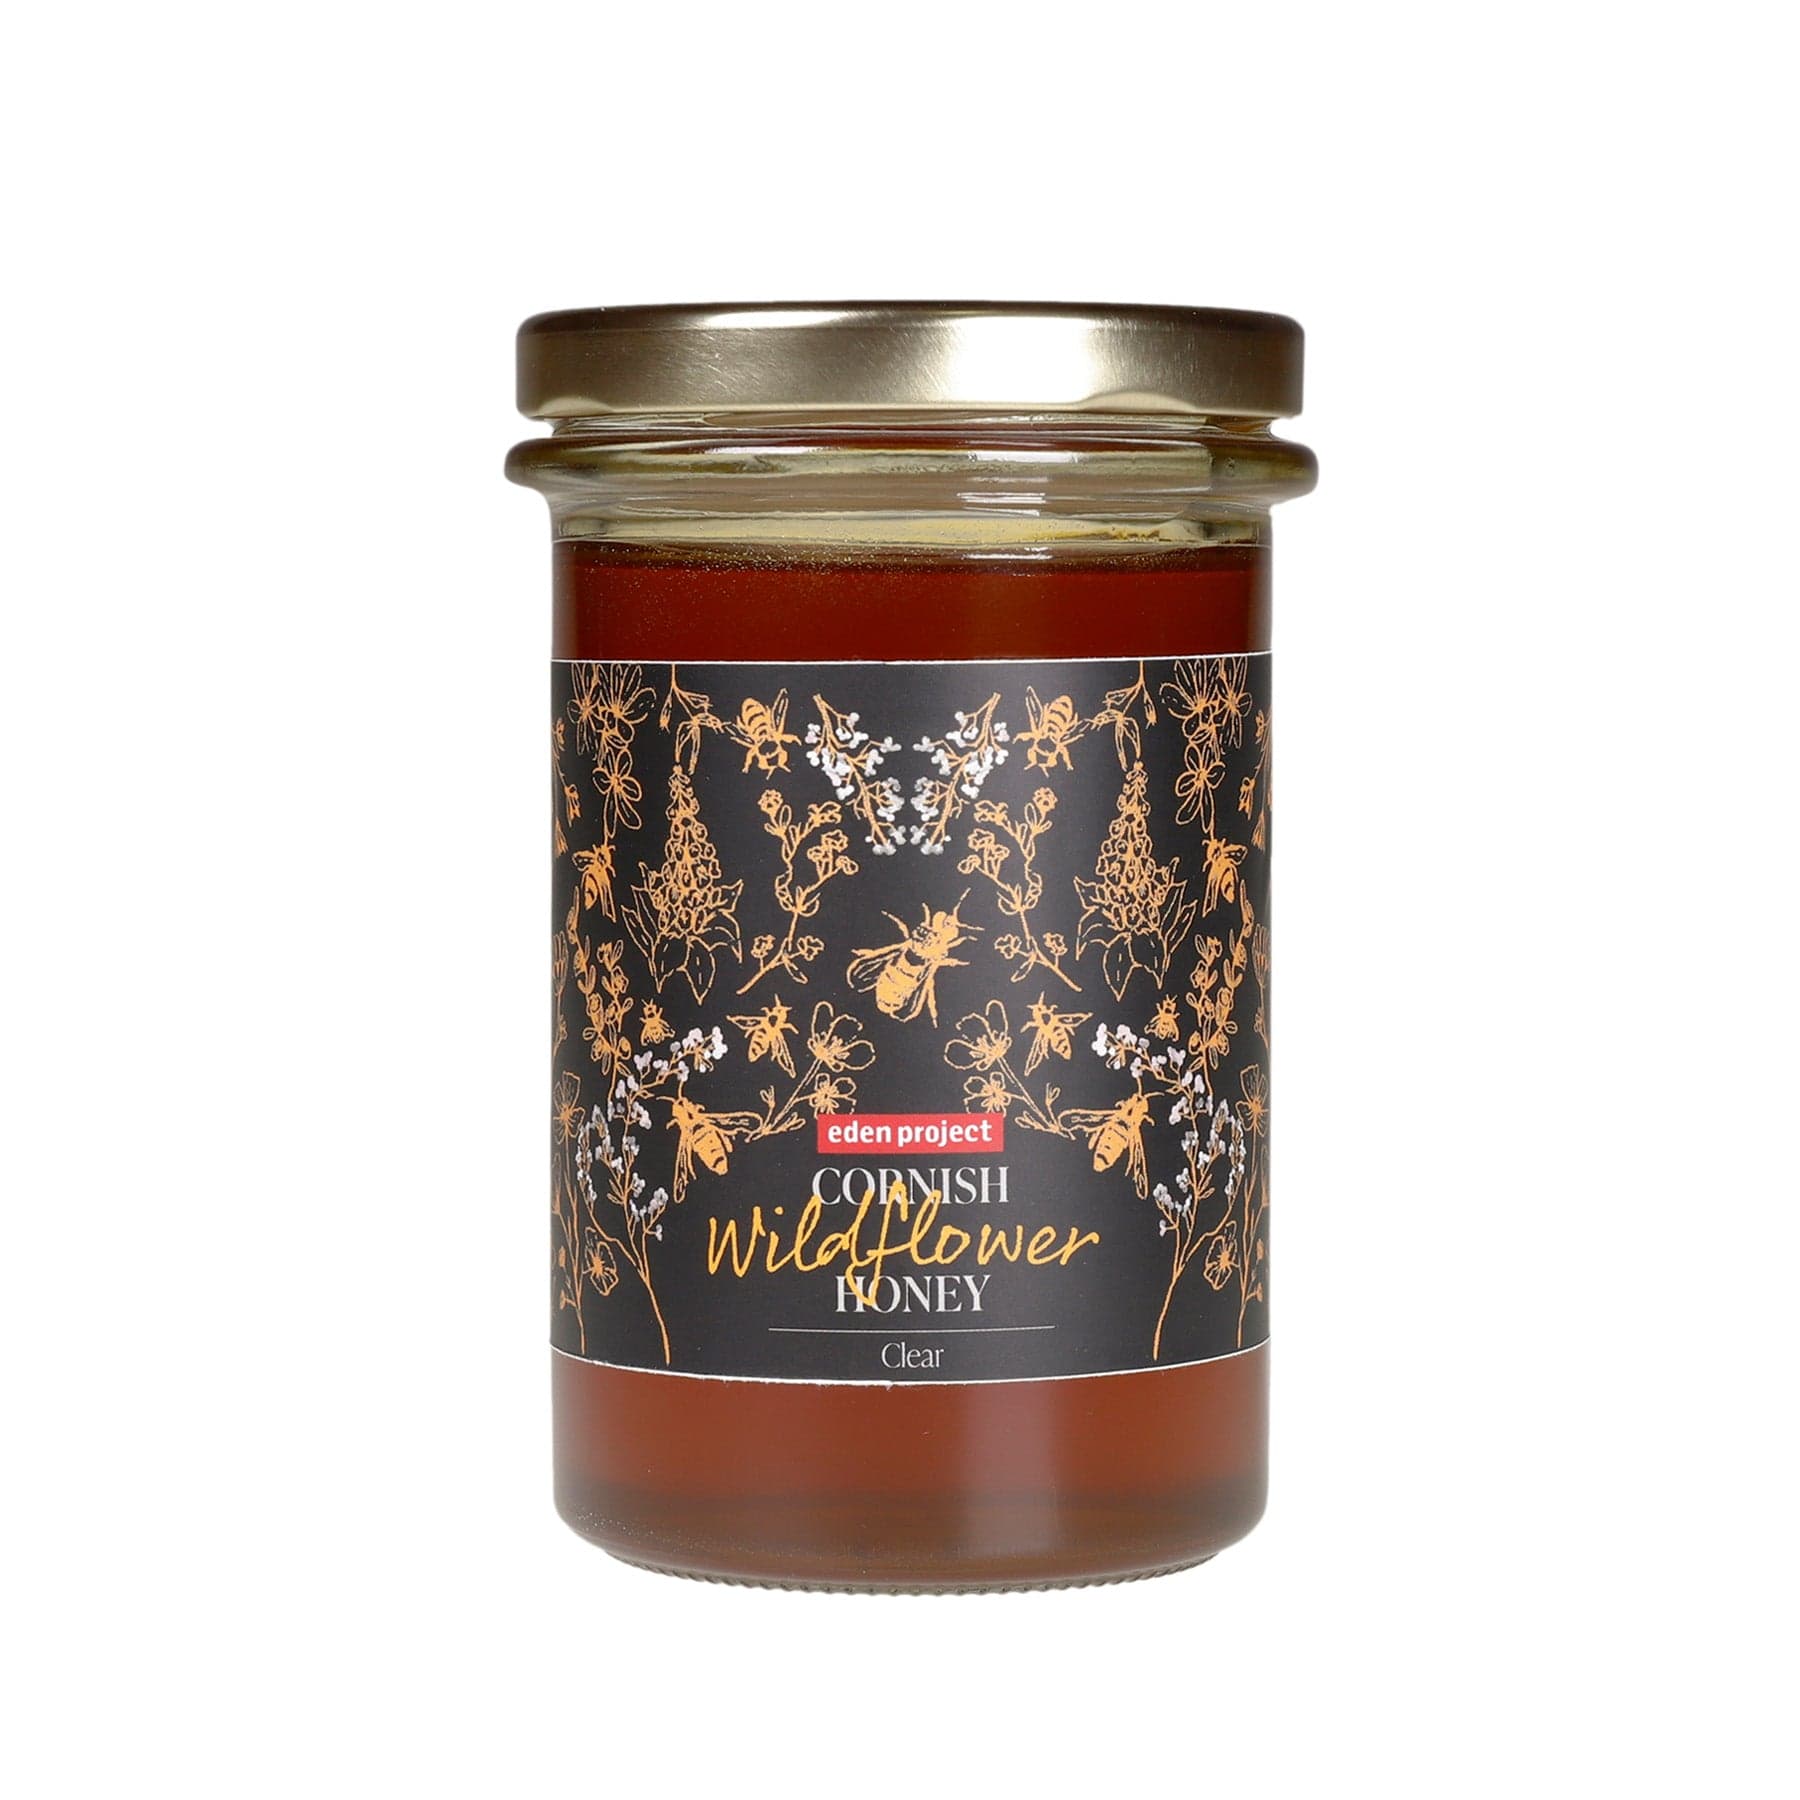 Jar of Eden Project Cornish Wildflower Honey, clear honey, black and gold label with bee and flower illustrations, white background